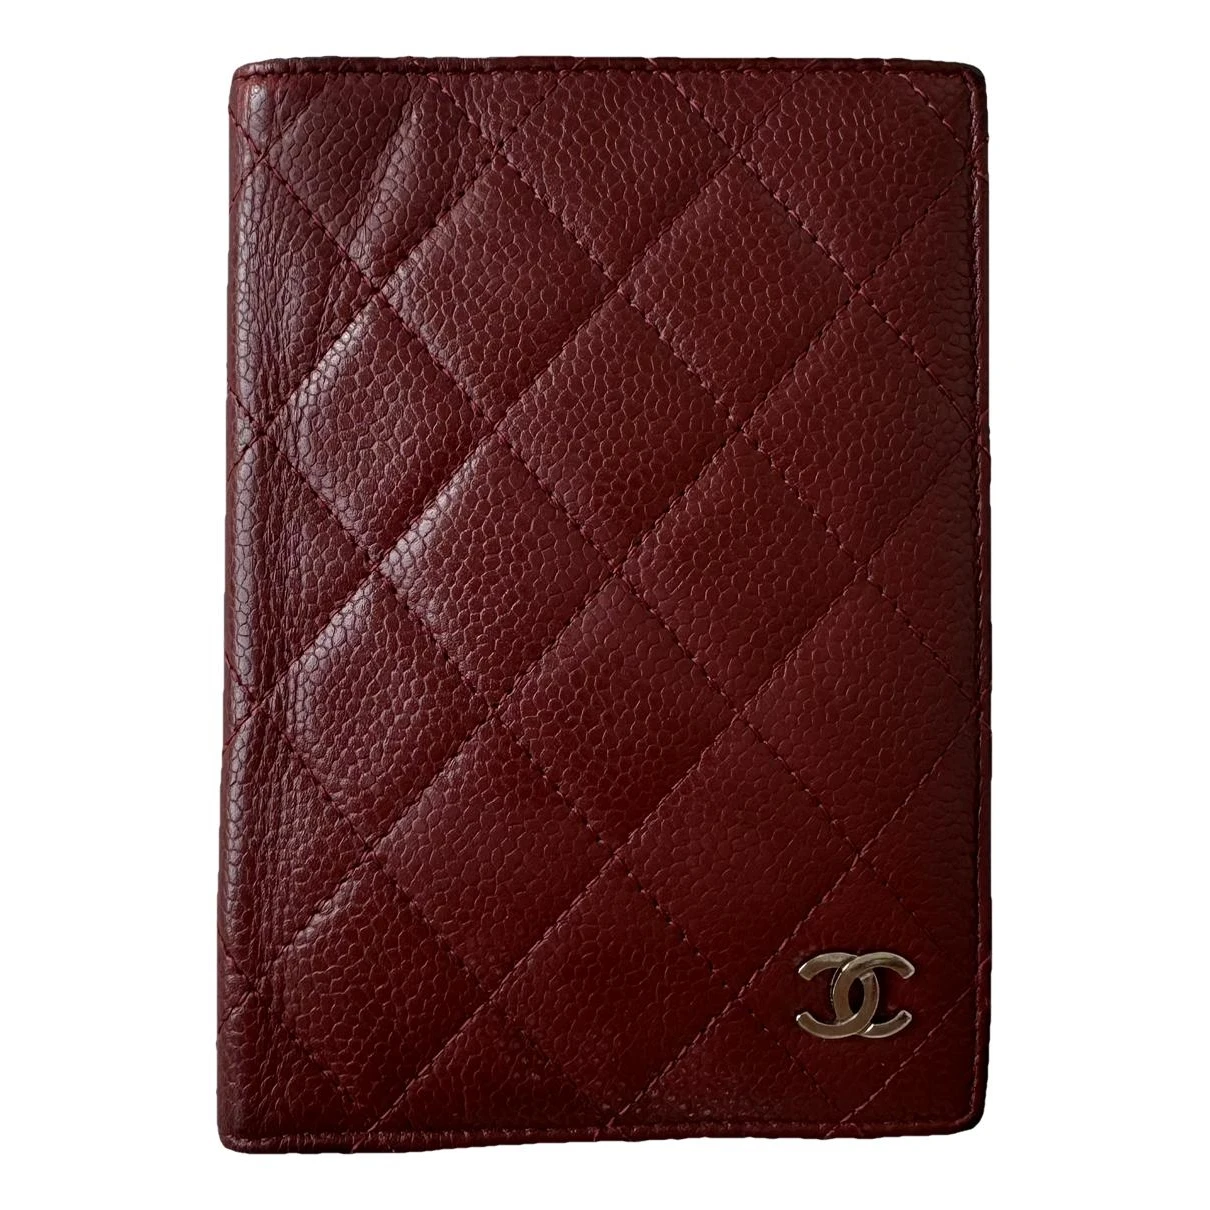 Pre-owned Chanel 19 Leather Wallet In Burgundy